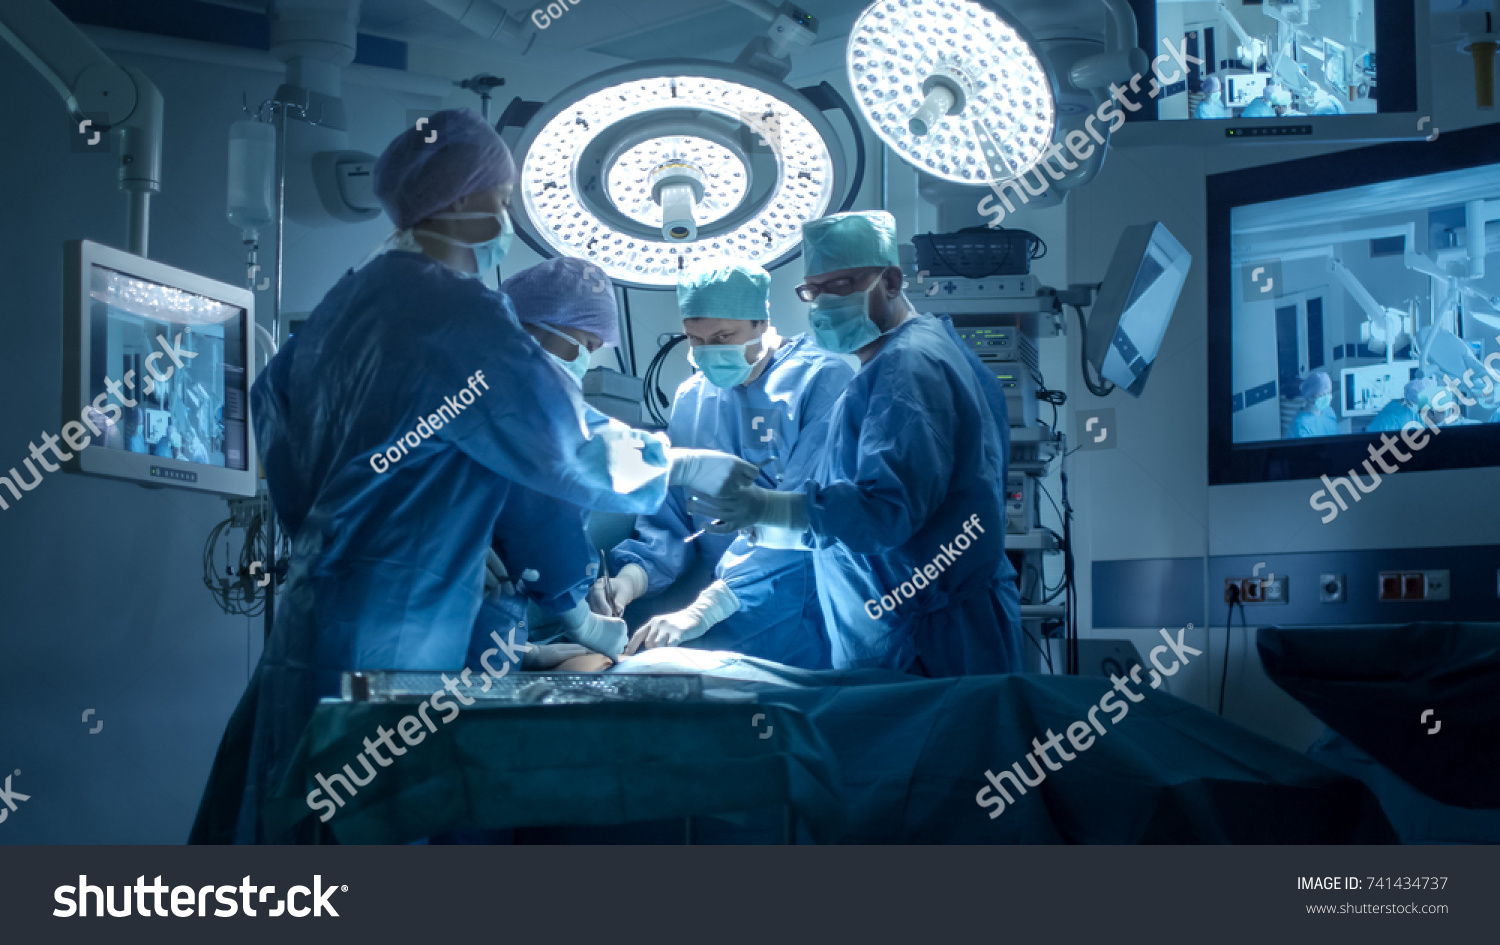 Medical Team Performing Surgical Operation in Modern Operating Room #741434737